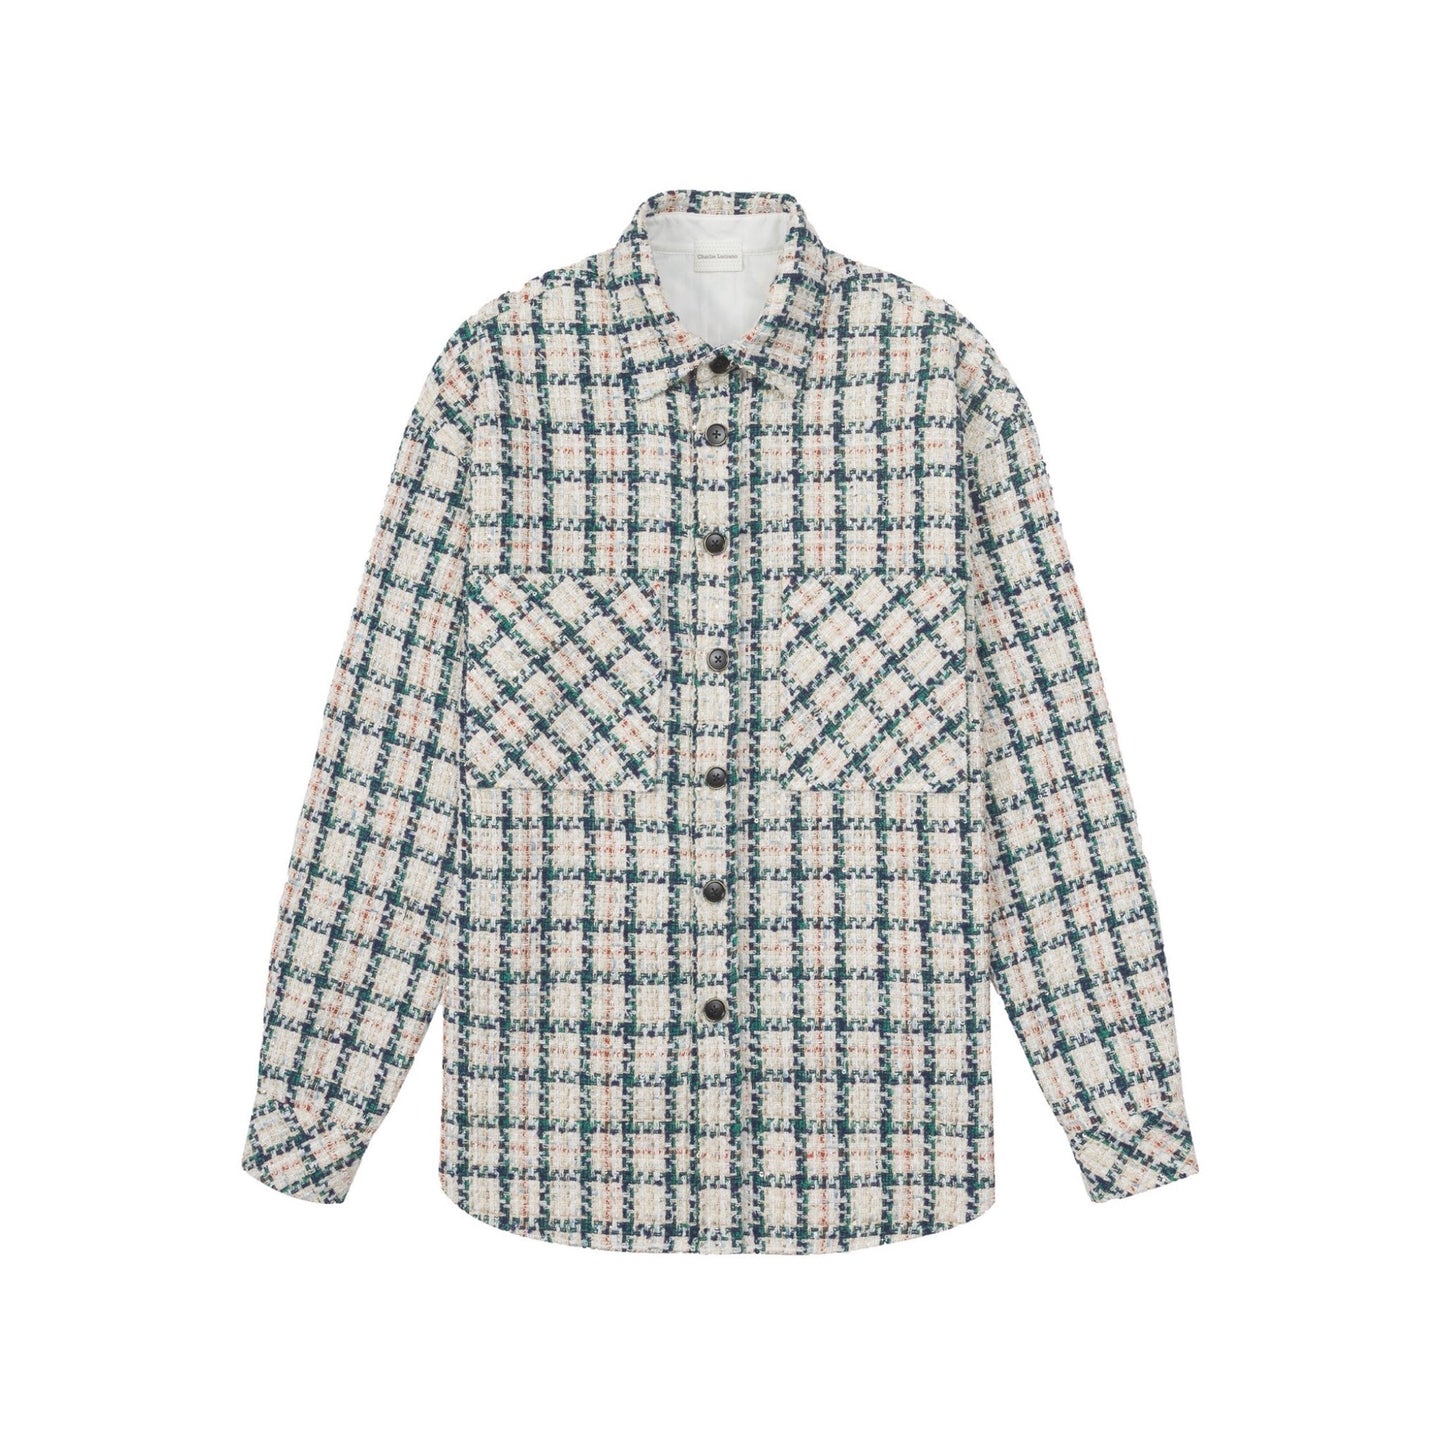 Charlie Luciano Tweed Overshirt Green and White